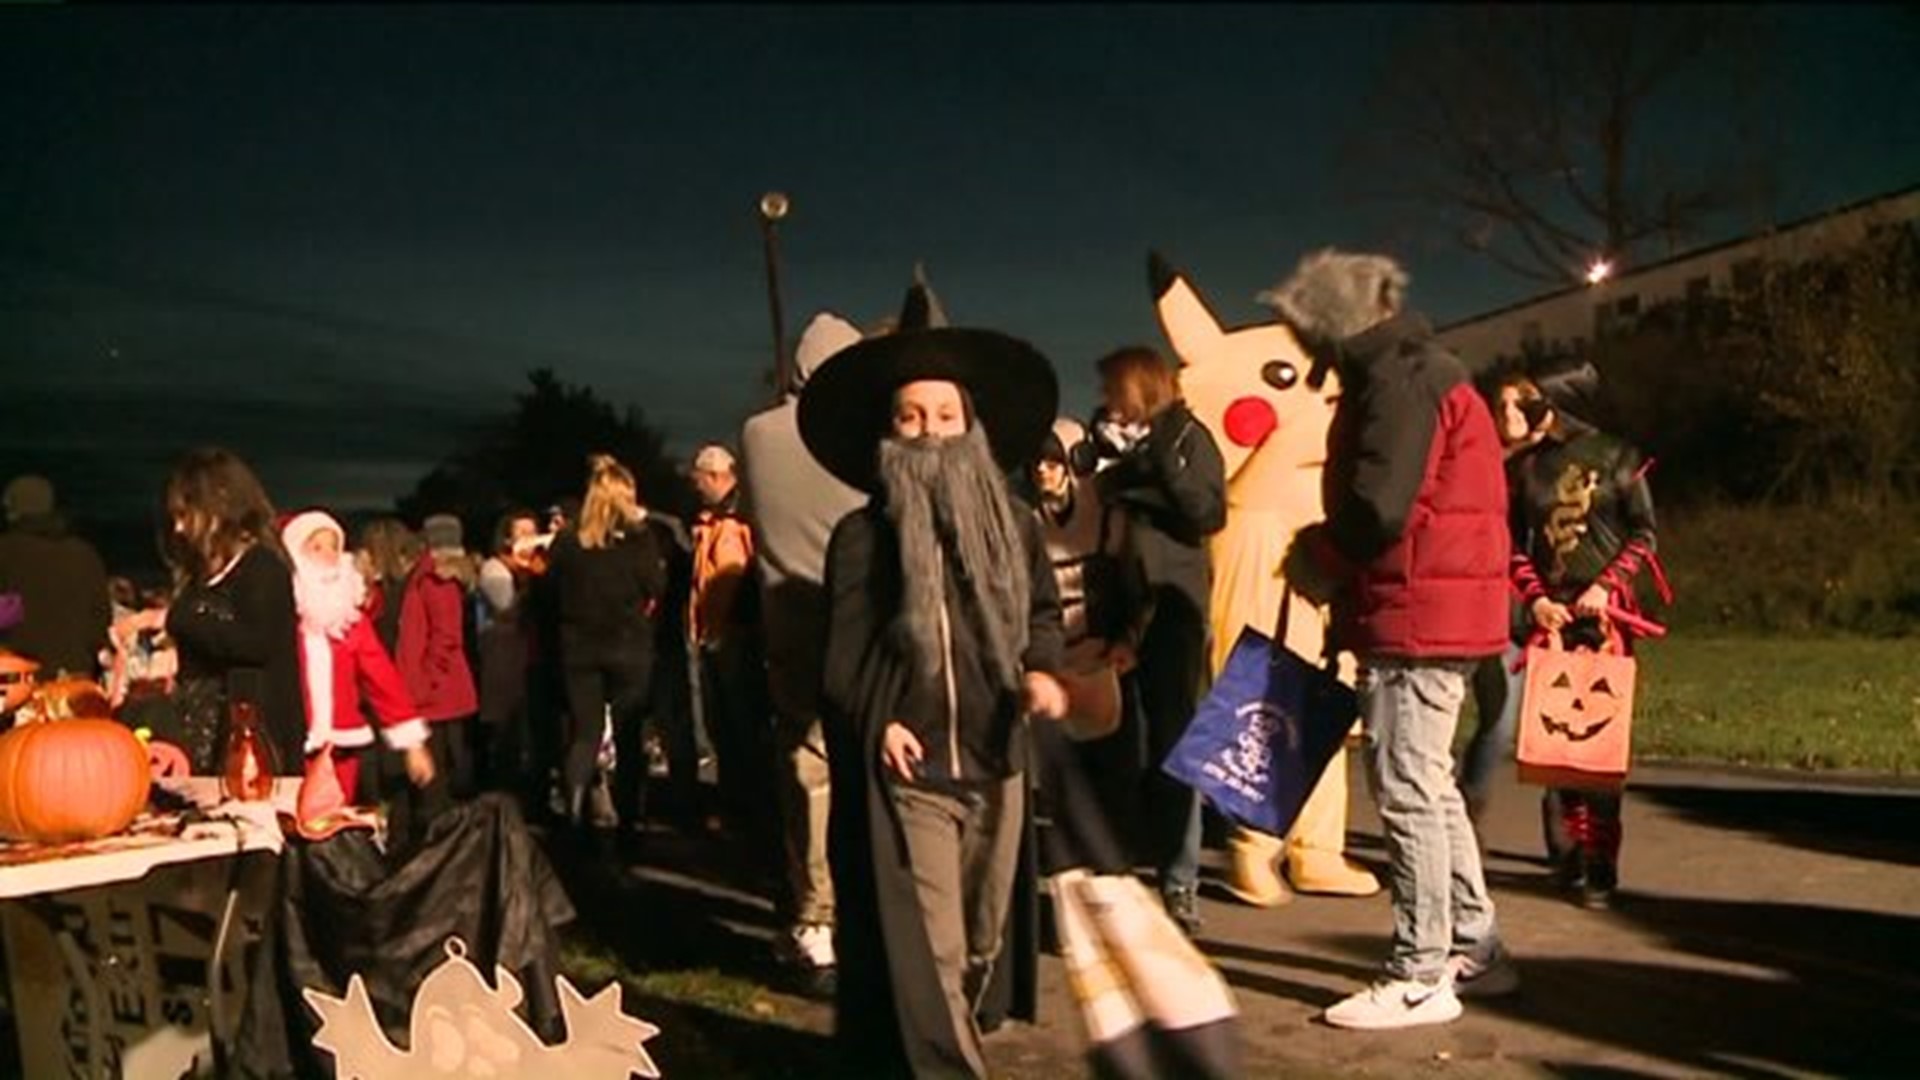 Back Mountain Community Holds Safe, Family-Friendly Halloween at Fairgrounds